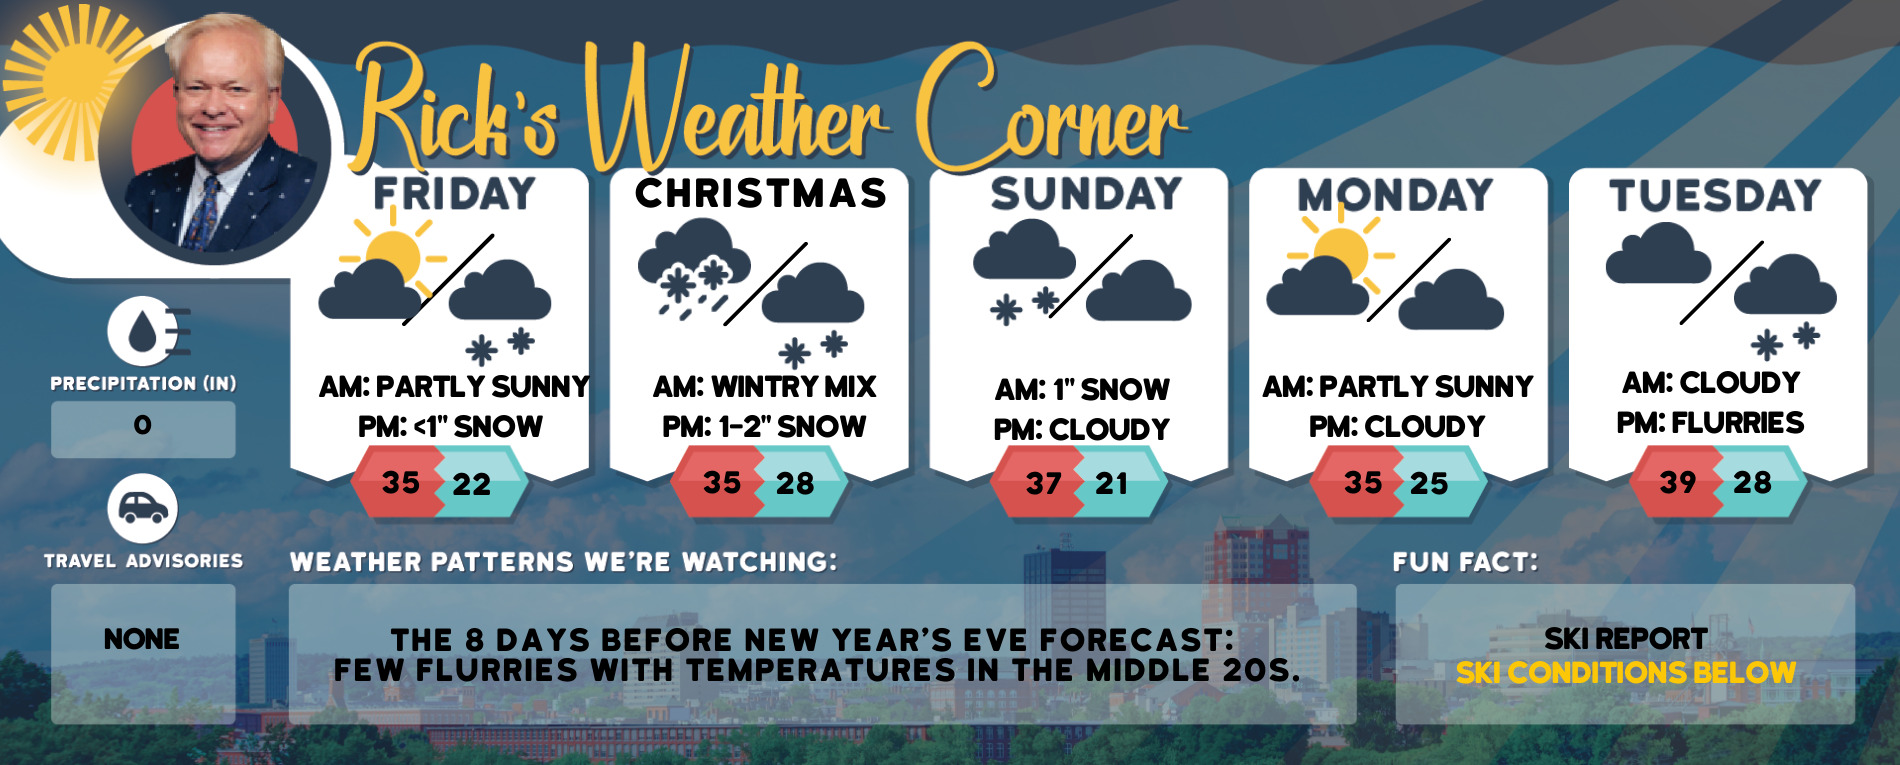 weather graphic 2 20